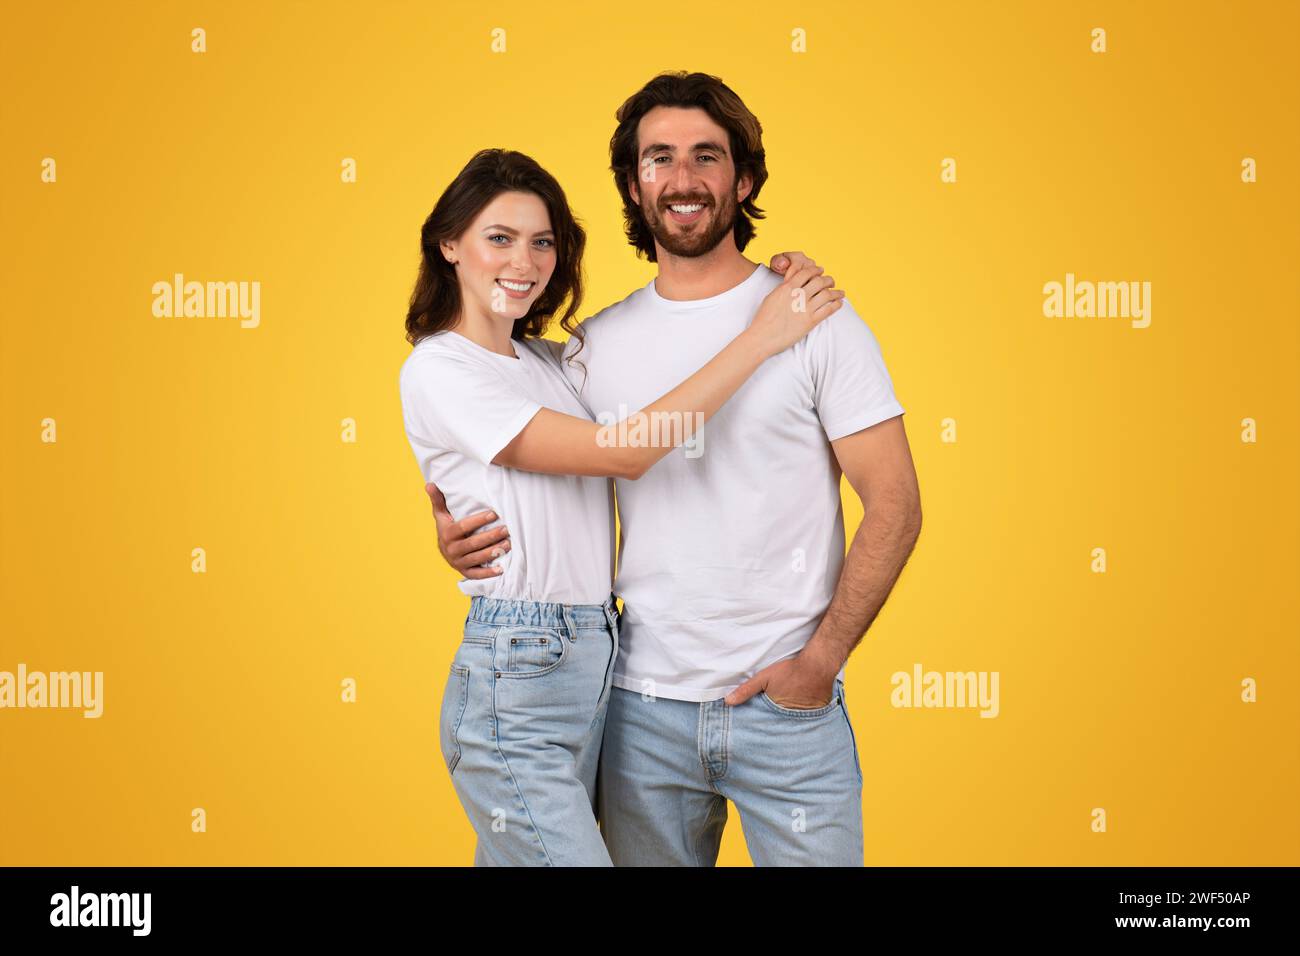 A happy couple in white t-shirts and blue jeans embrace each other with a smile Stock Photo